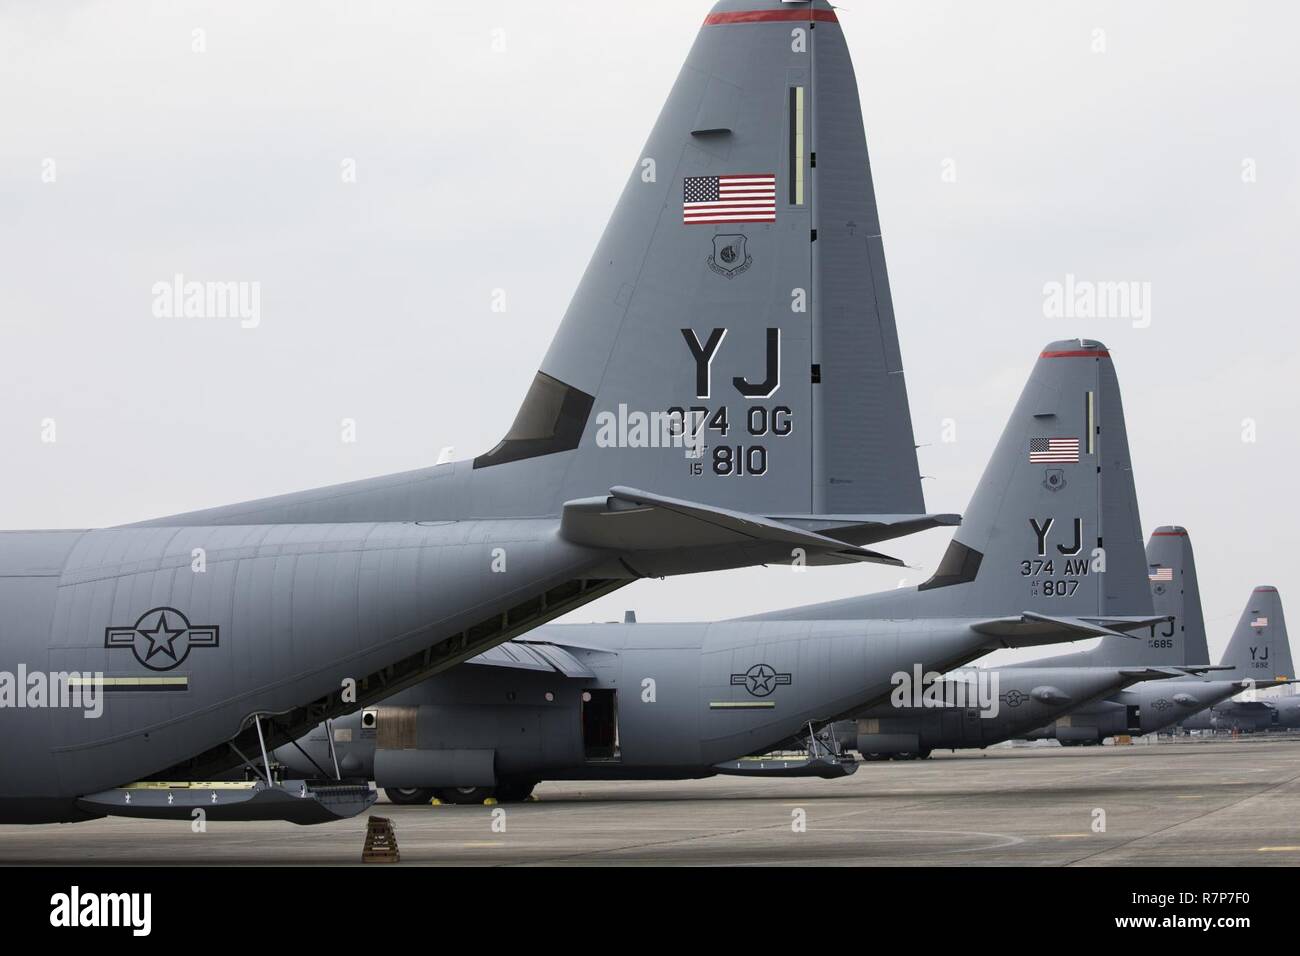 Two C-130J Super Hercules and two C-130H Hercules aircraft sit on the flightline at Yokota Air Base, Japan, March 29, 2017. Yokota is the only forward-based tactical airlift squadron in the Pacific region. They provide C-130 aircrews to conduct theater airlift, special operations, aeromedical evacuation, repatriation and humanitarian relief missions. Stock Photo